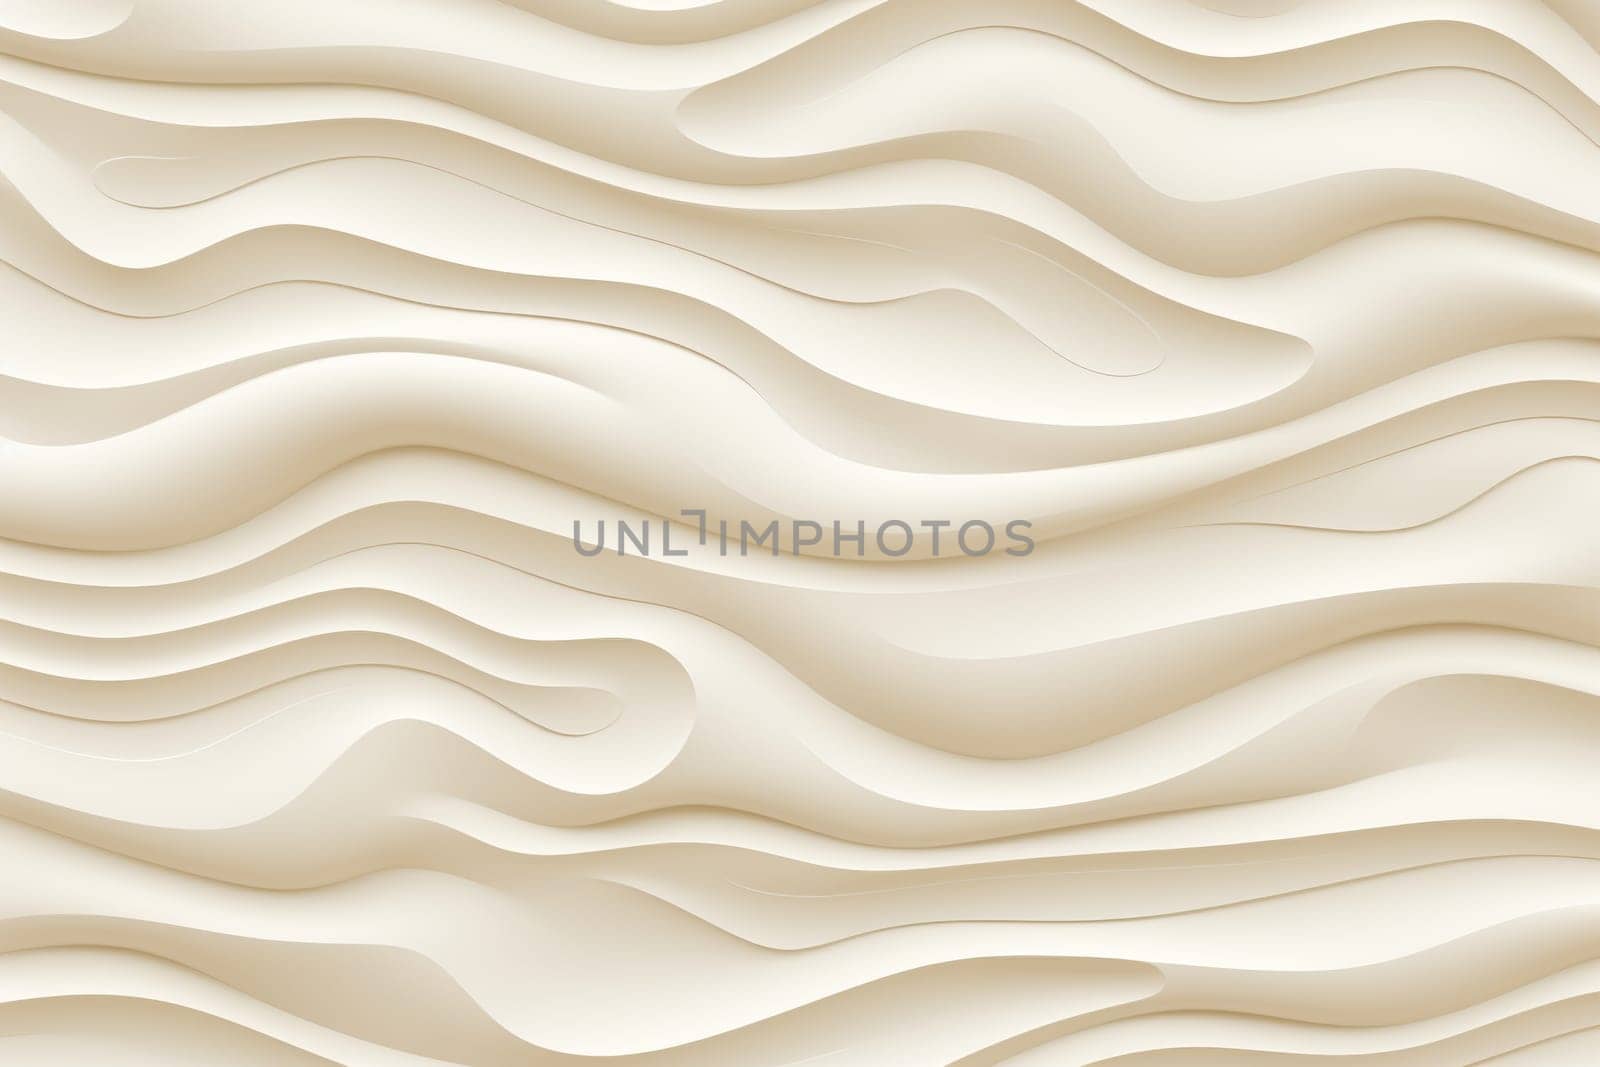 Beige and white abstract wave background. elegant and serene design element for graphic projects